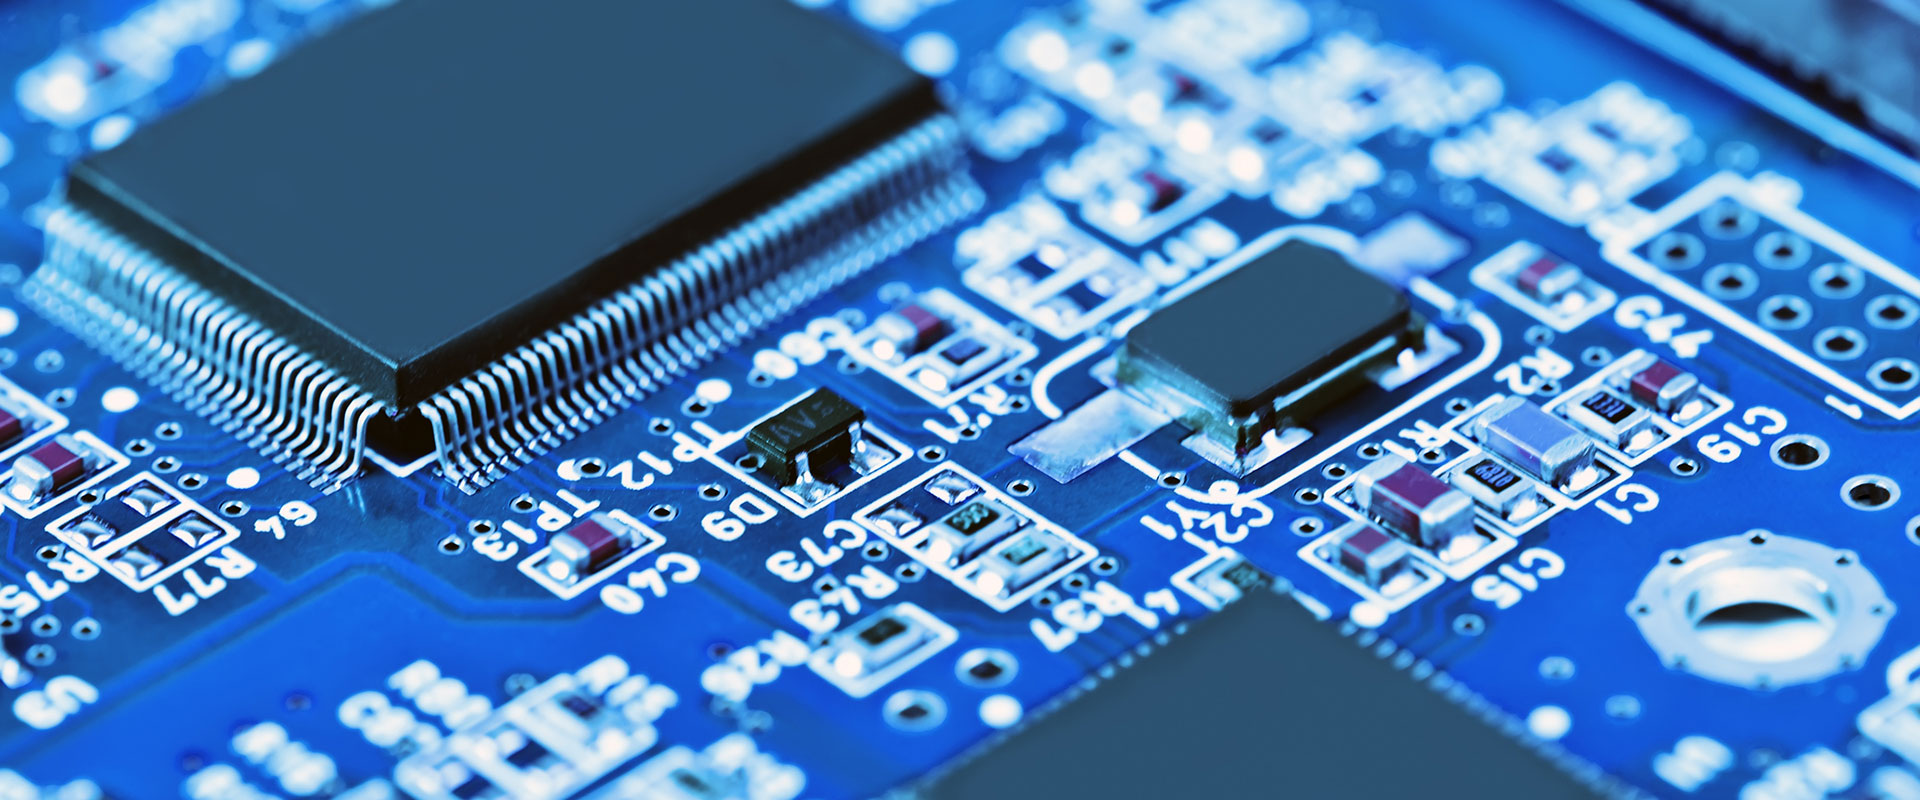 A zoomed in shot of a blue circuit board